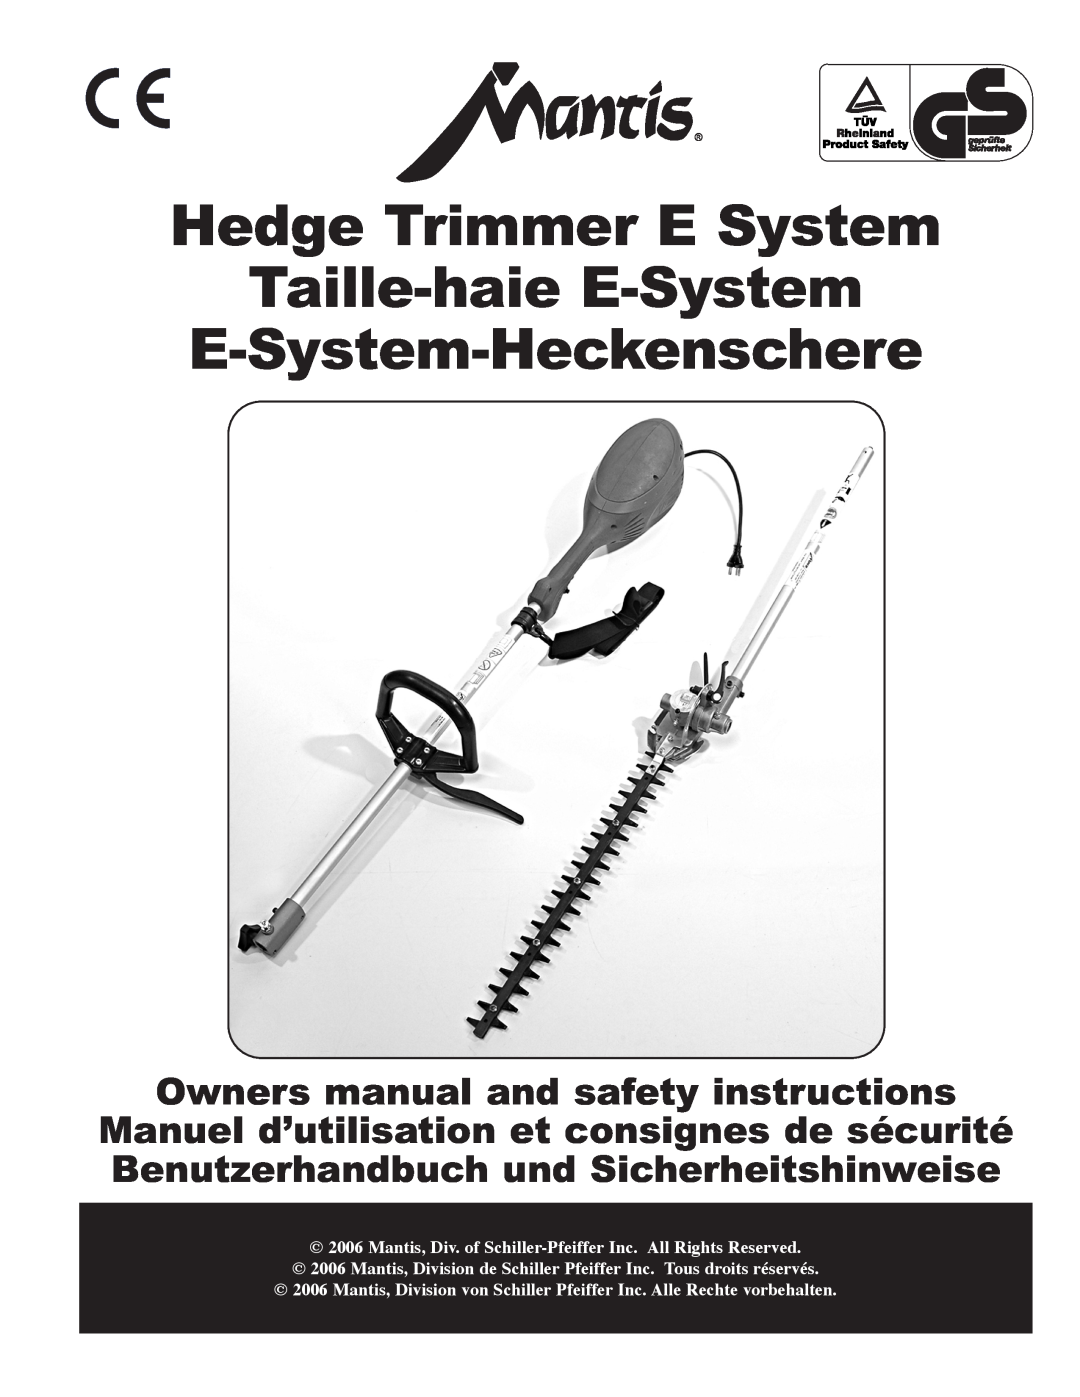 Mantis owner manual Hedge Trimmer E System Taille-haie E-System, E-System-Heckenschere 